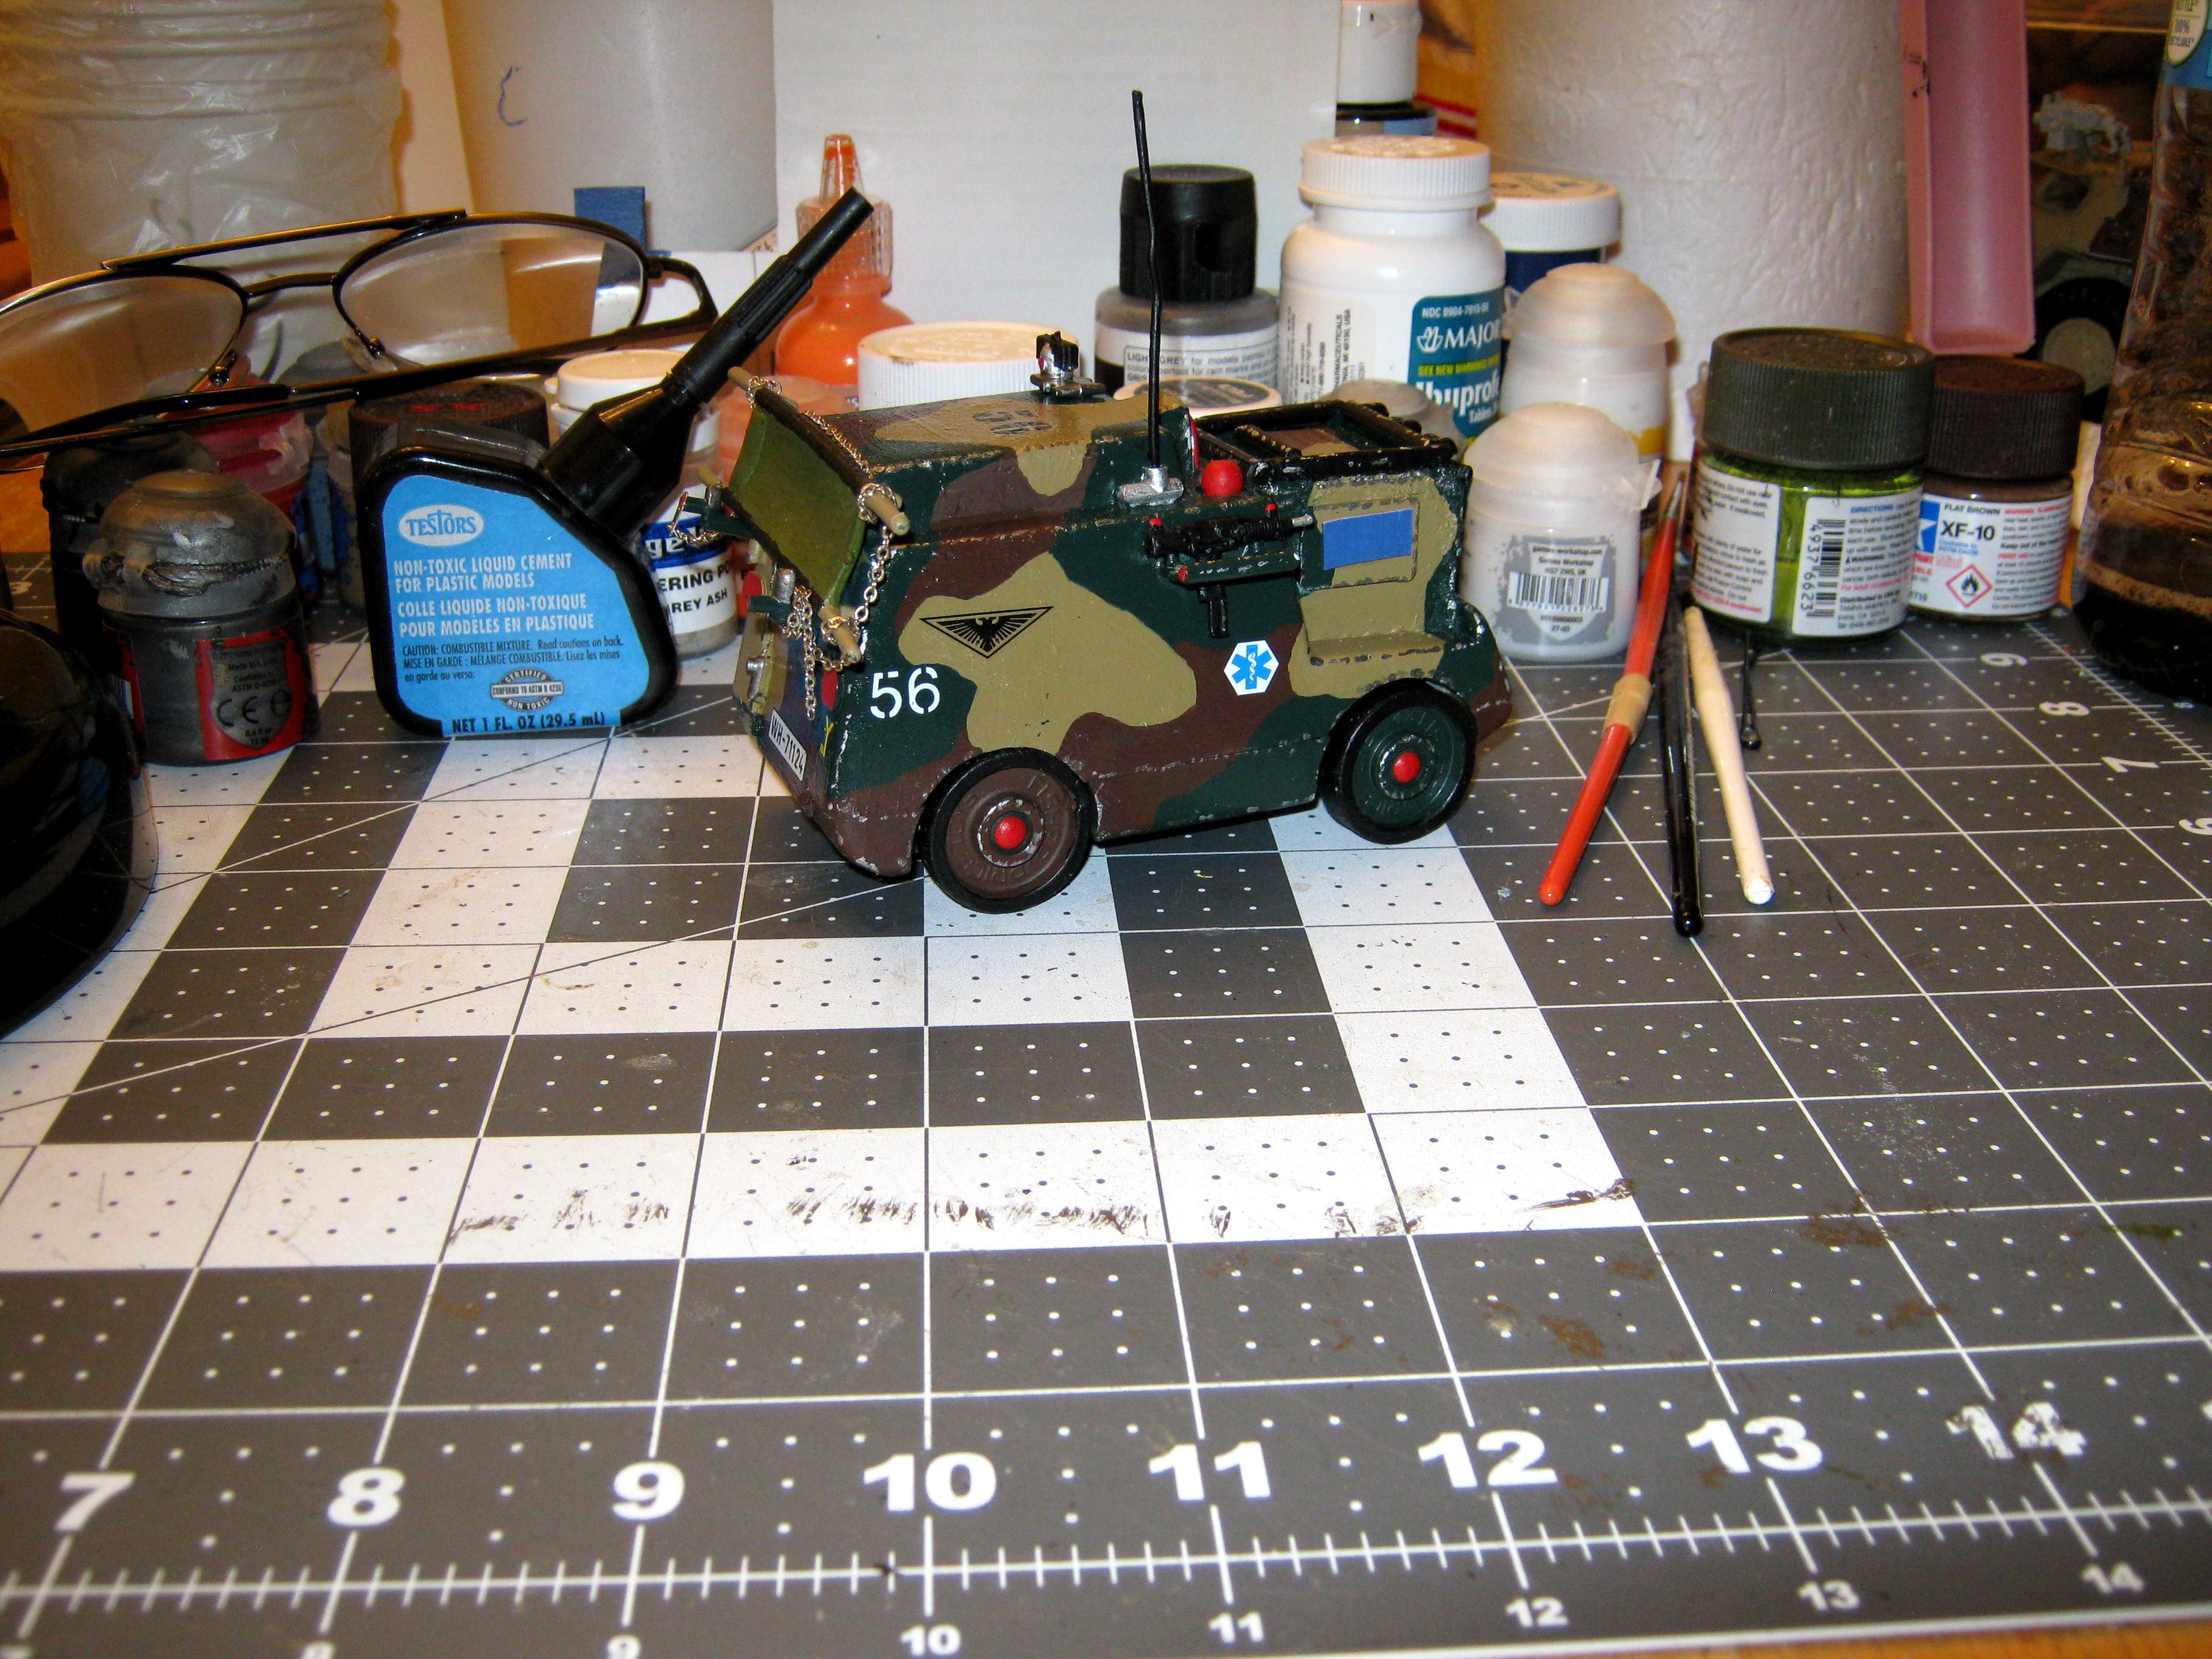 Ambulance, Conversion, Counts As, Fisher Price, Imperial, Military Ambulance, Toy, Truck